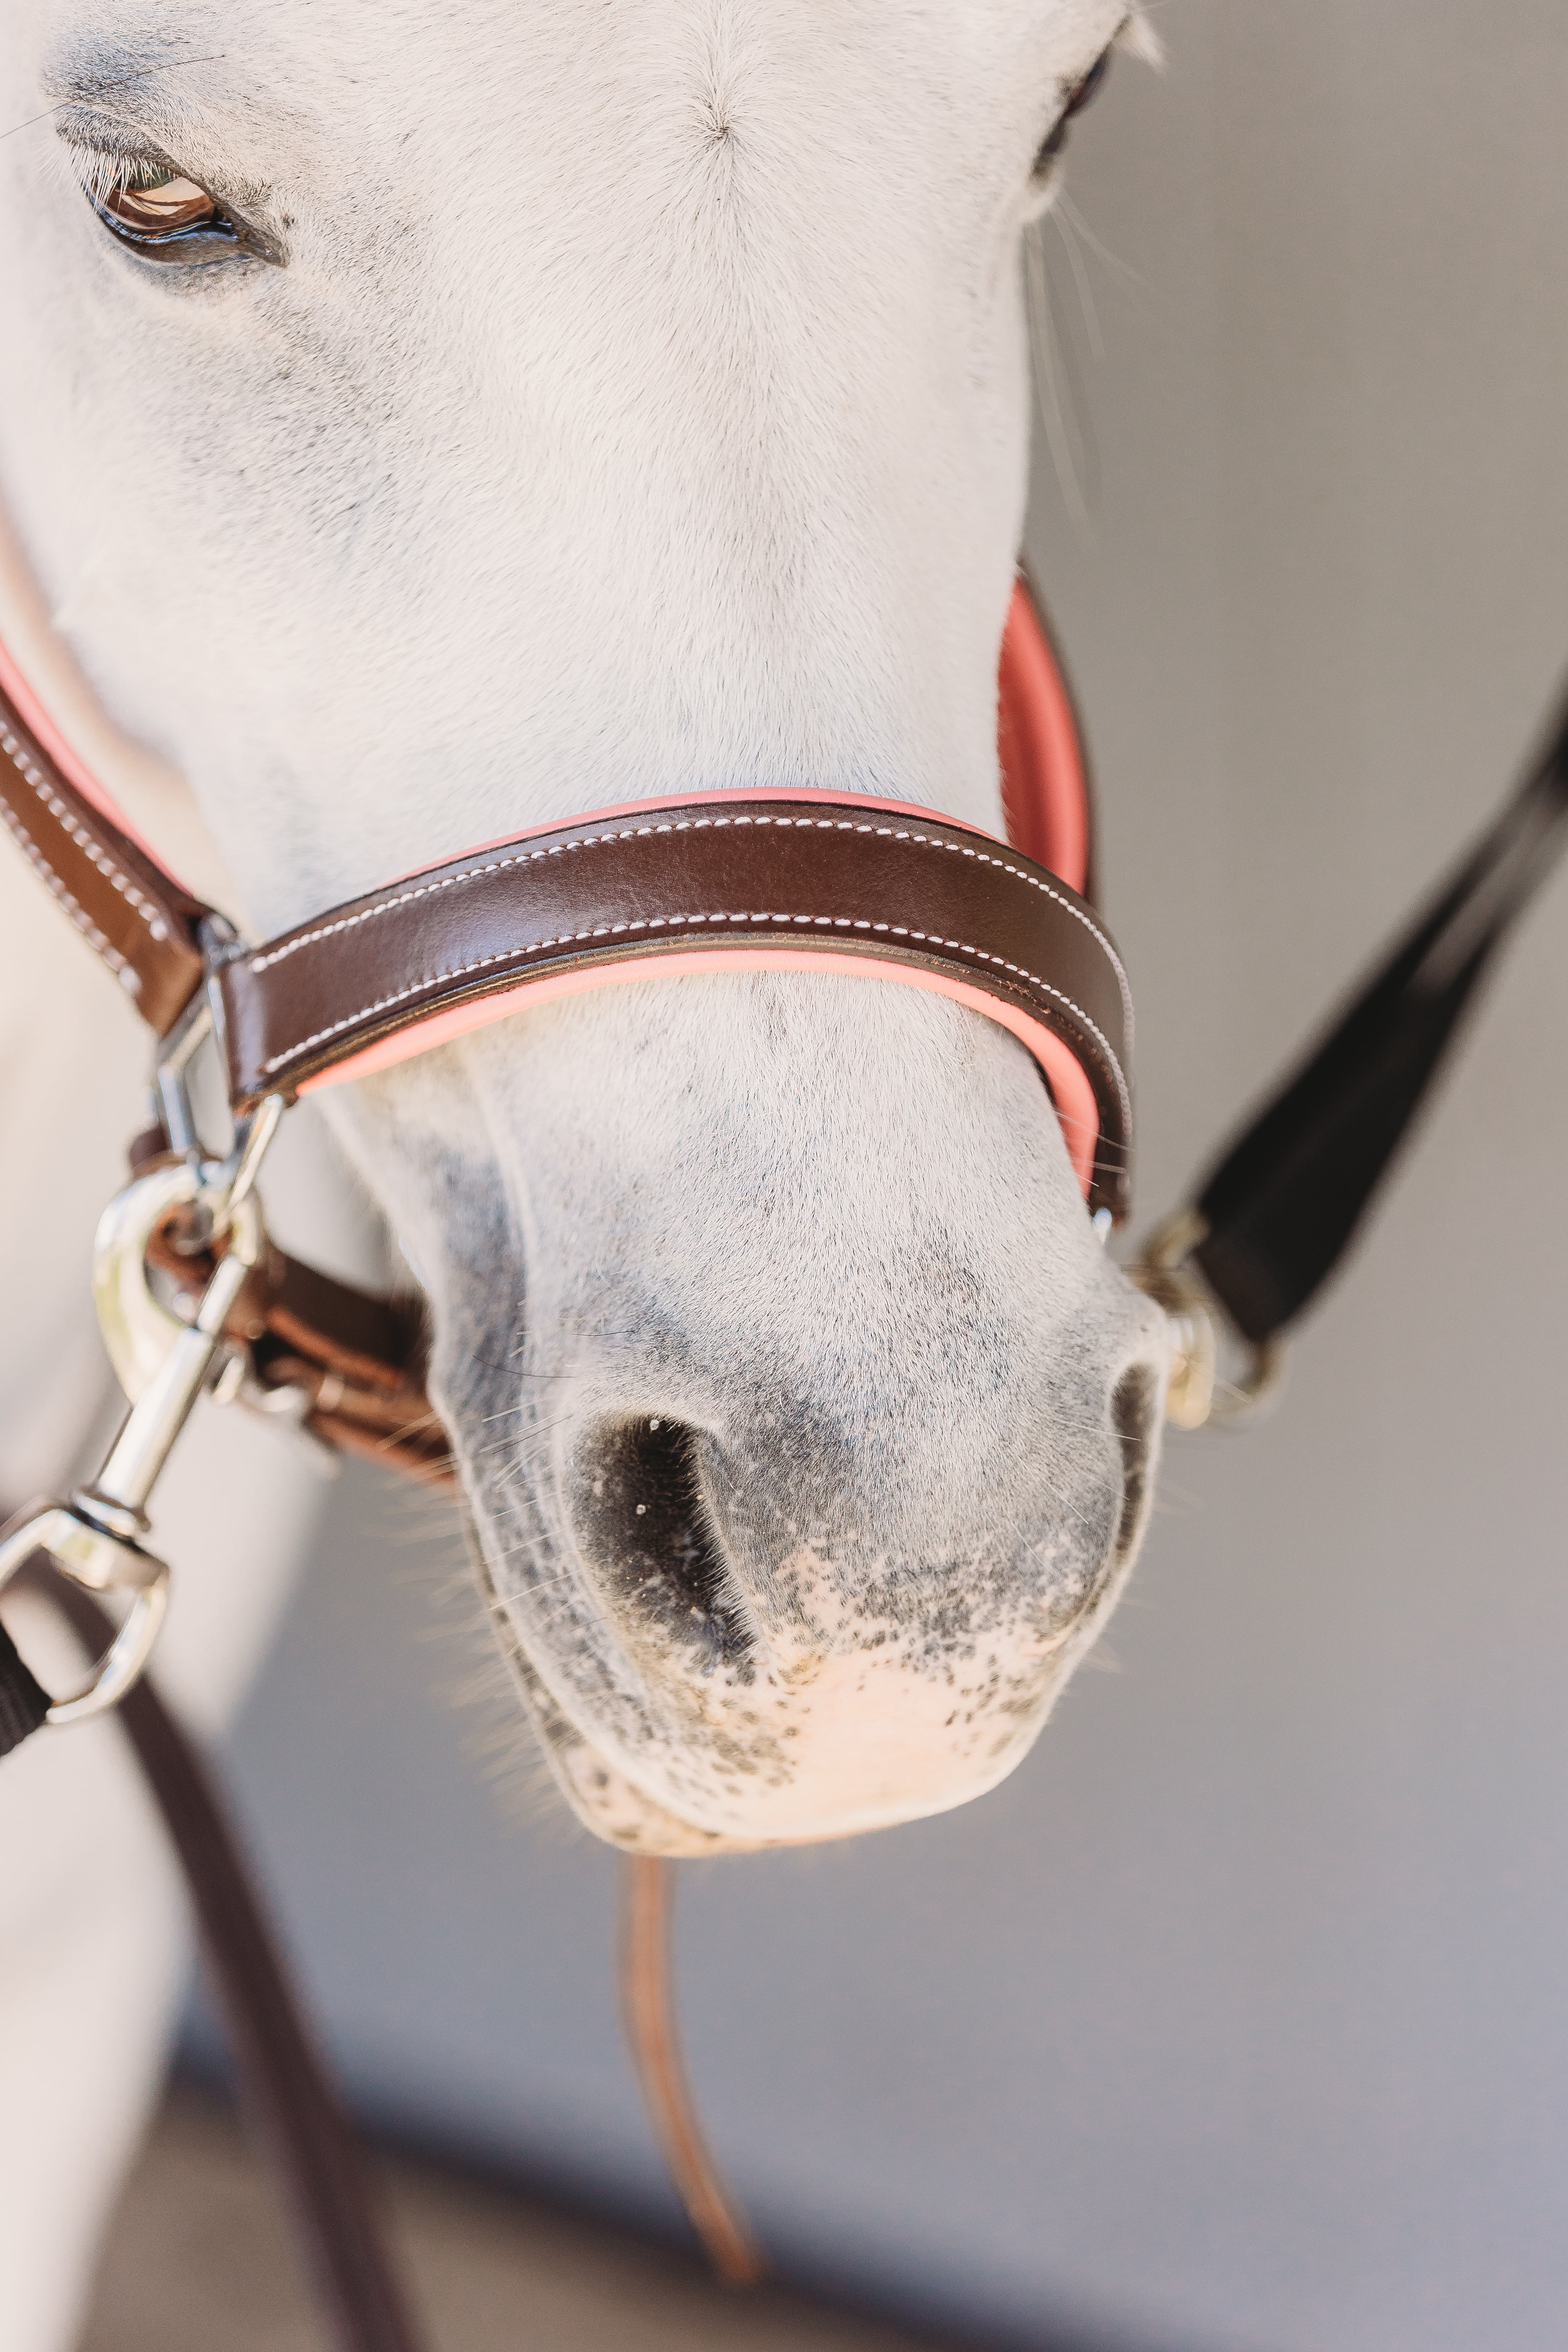 Equiluxe Pink Padding Leather Halter - Equiluxe Tack